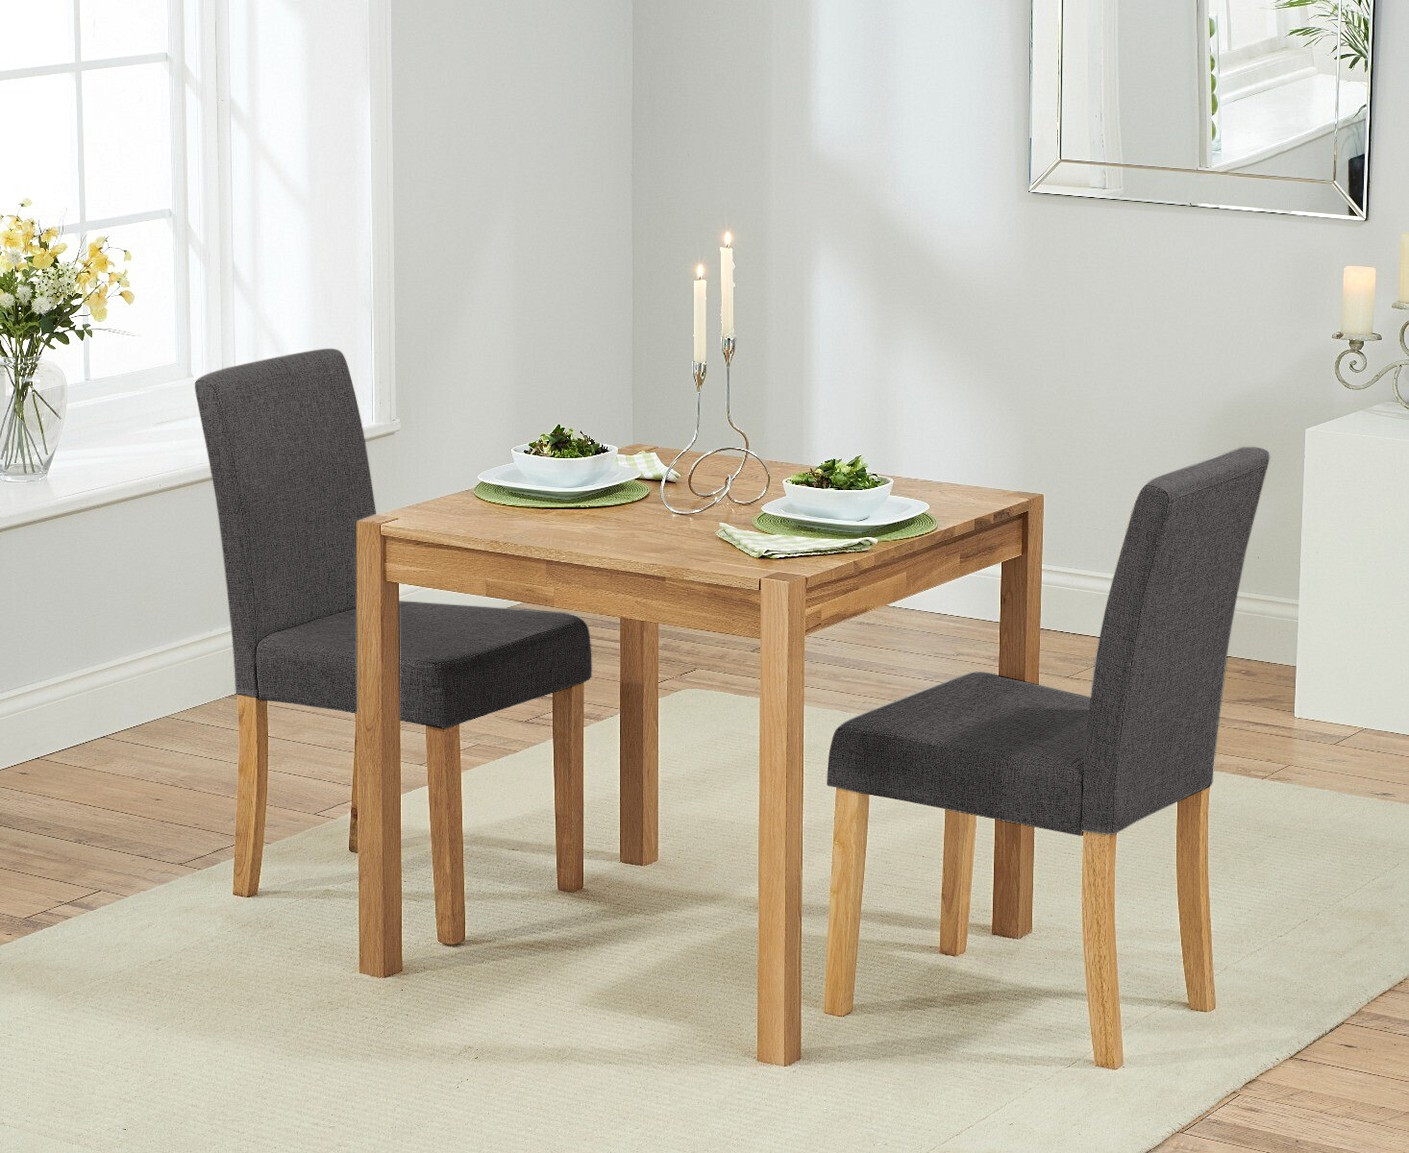 Photo 2 of York 80cm solid oak dining table with 4 charcoal lila chairs